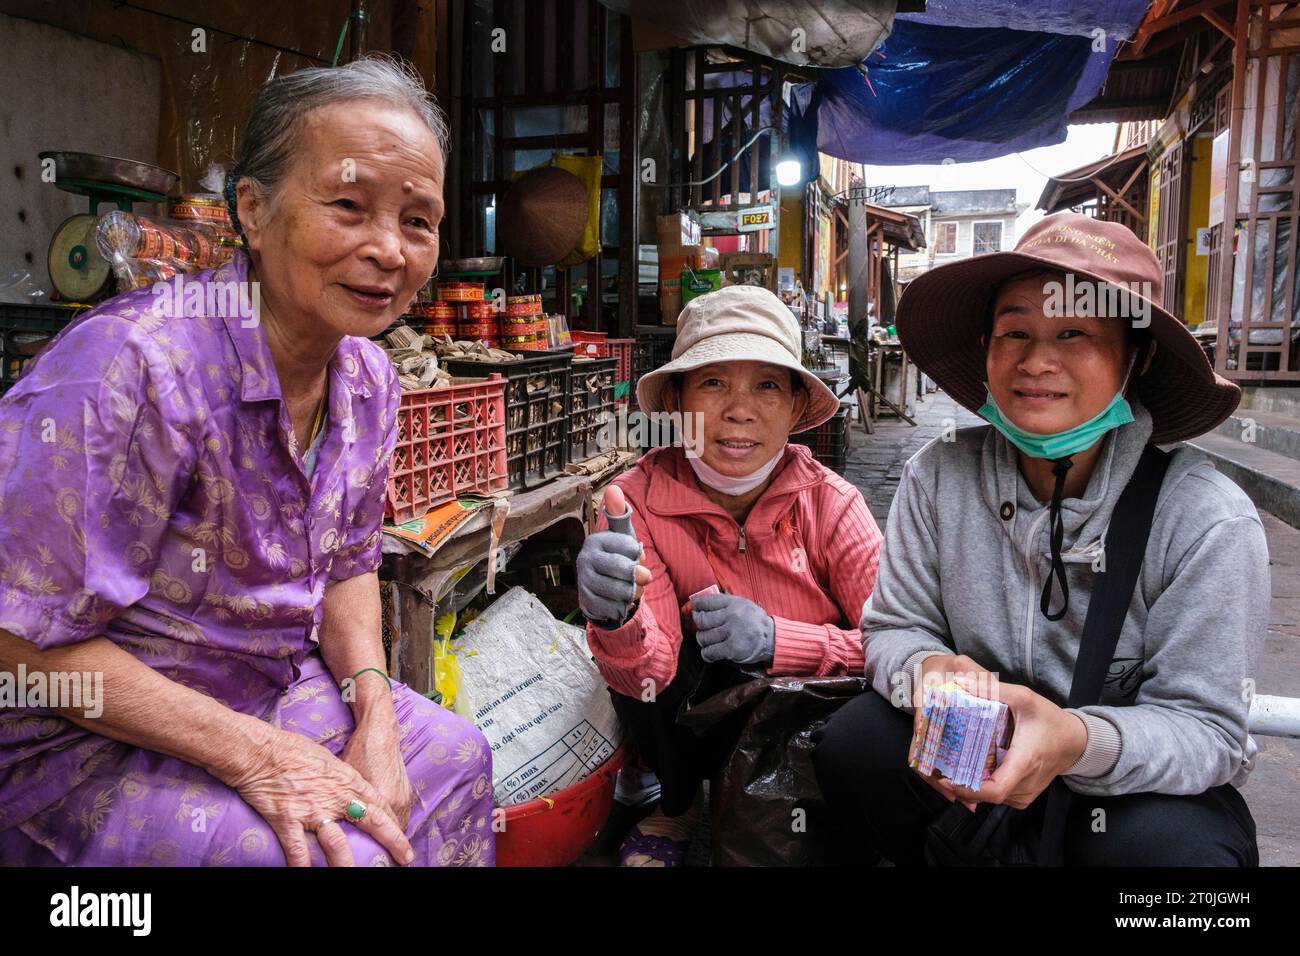 Hoi An, Vietnam. Three Middle-aged Women in the Market. Stock Photo